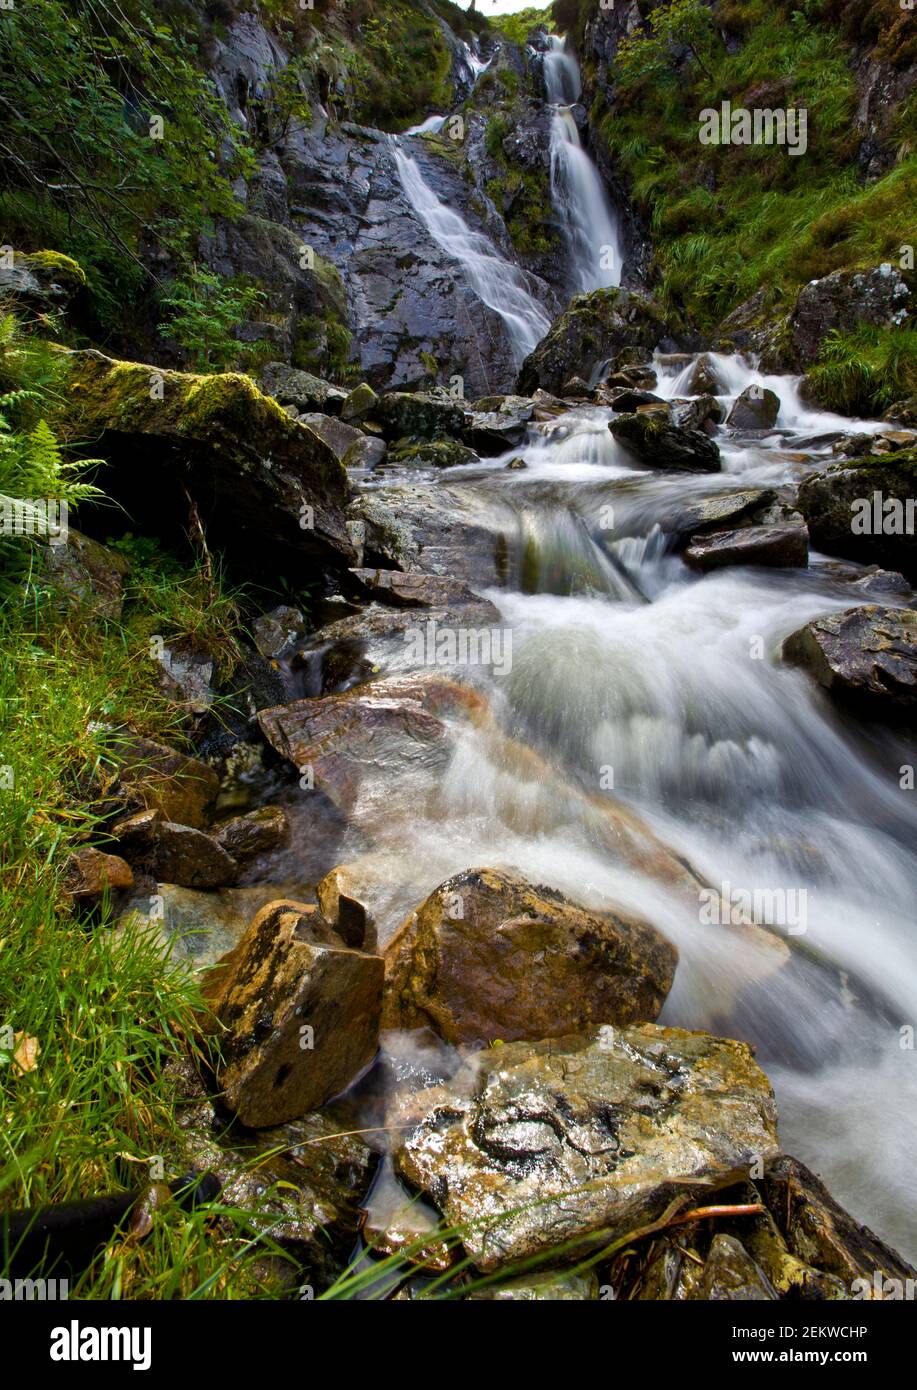 extended waterfall on a hillside, canyon, hiking, nature, running water, rocks, grasses, mountain walking, rural, outback Stock Photo